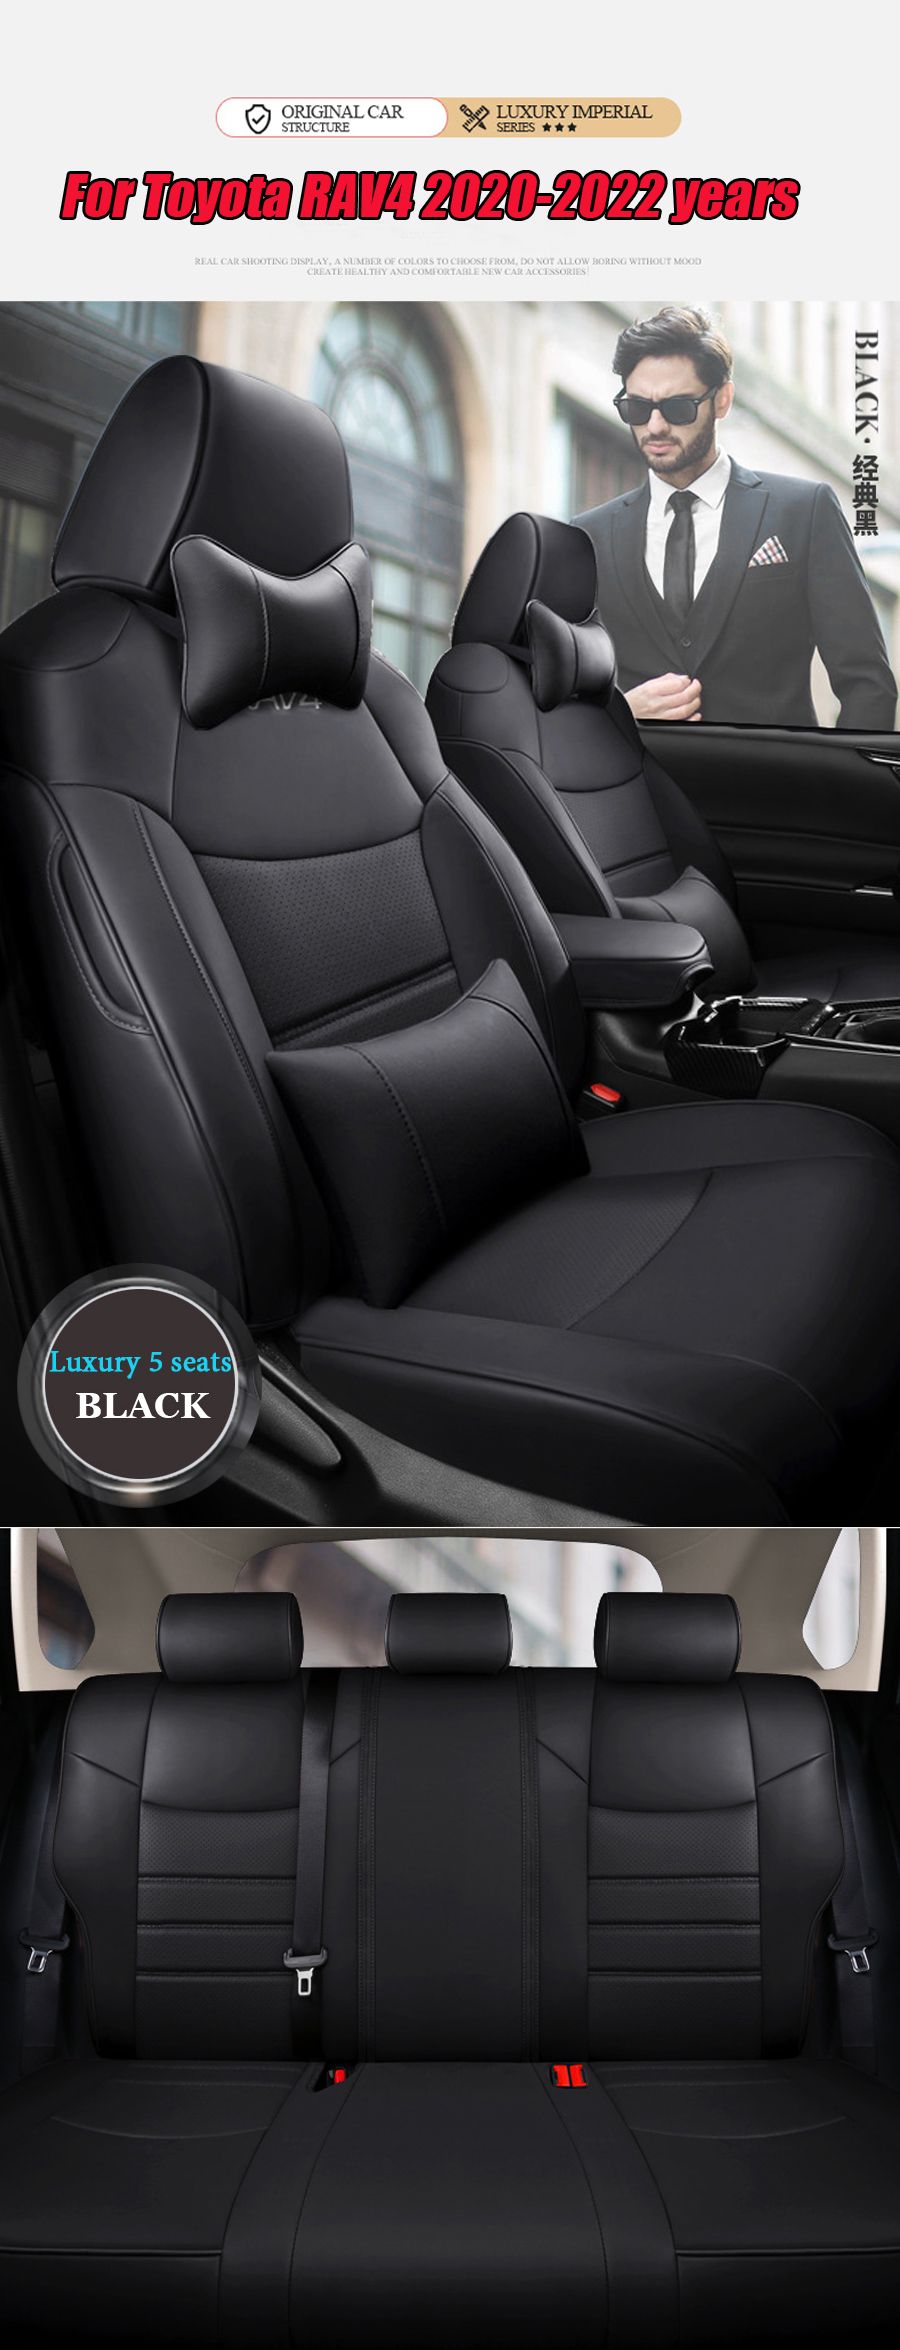 Auto Original Custom Car Seat Covers For Toyota Rav4 Years Leather  Protector Water Proof Front /Rear Seats Cushion From Lshl520, $131.04